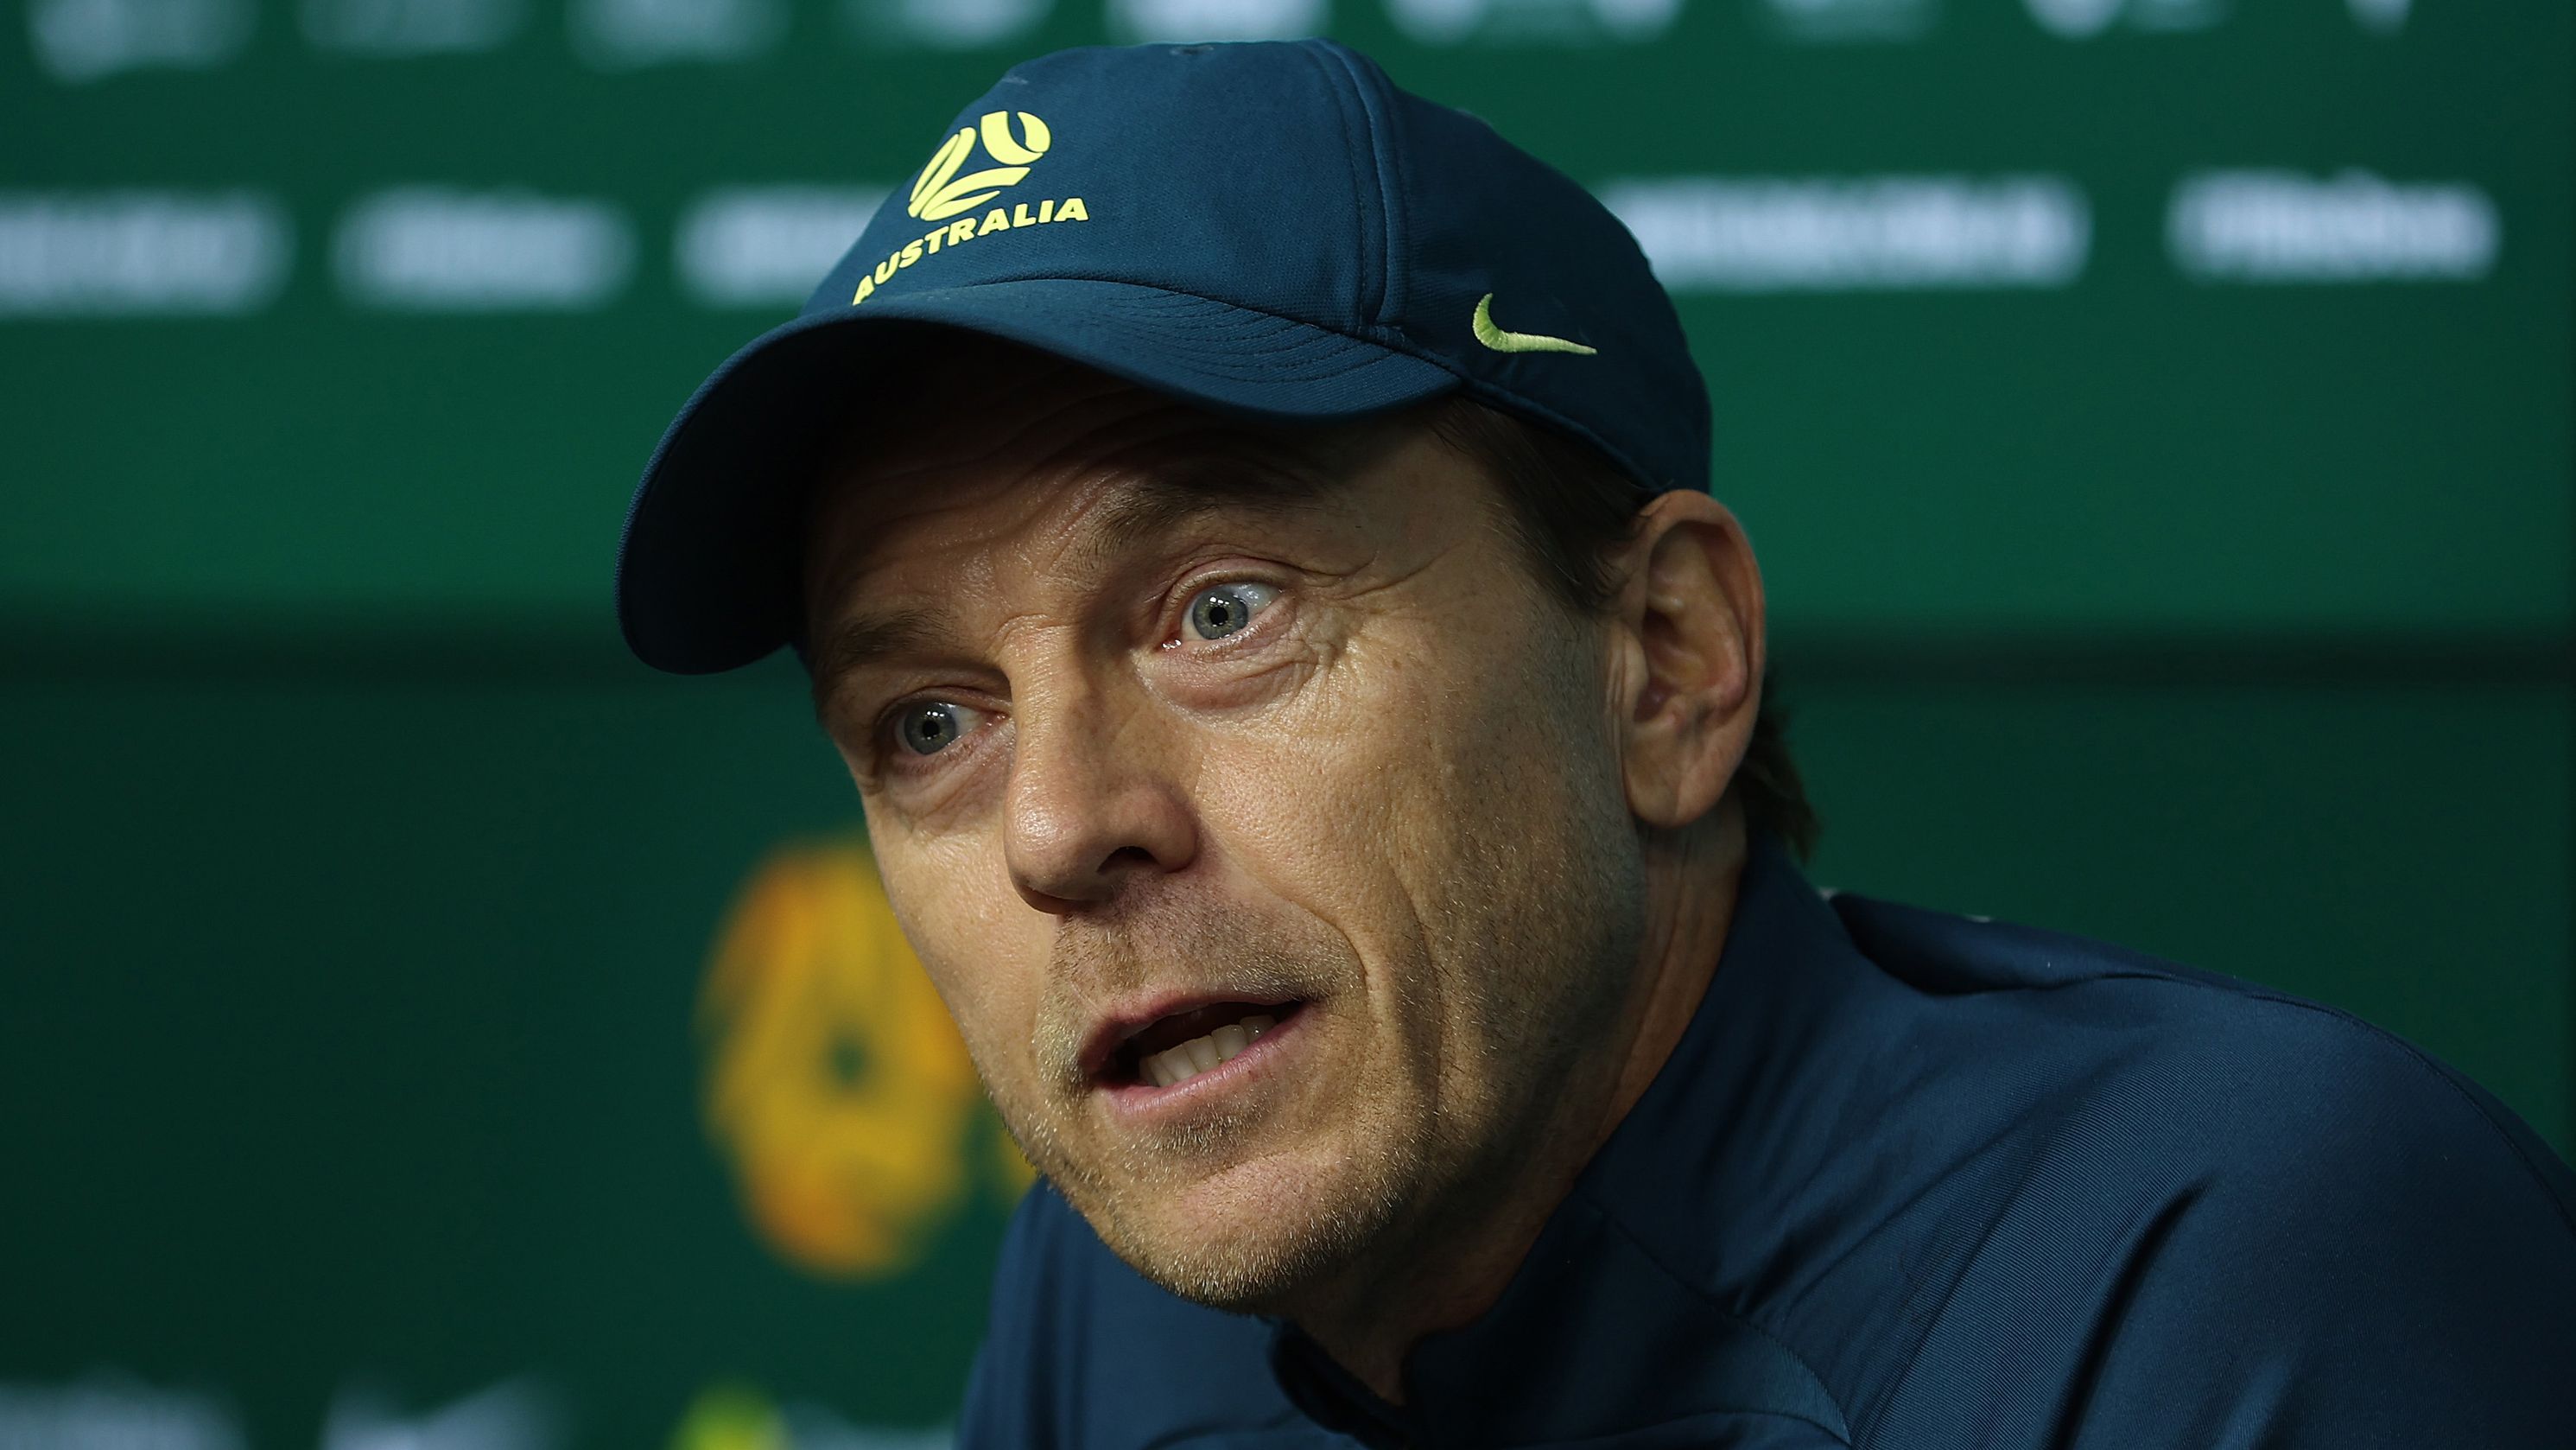 MELBOURNE, AUSTRALIA - JULY 13: Matildas head coach Tony Gustavsson speaks to the media during an Australia press conference at Marvel Stadium on July 13, 2023 in Melbourne, Australia. (Photo by Robert Cianflone/Getty Images)